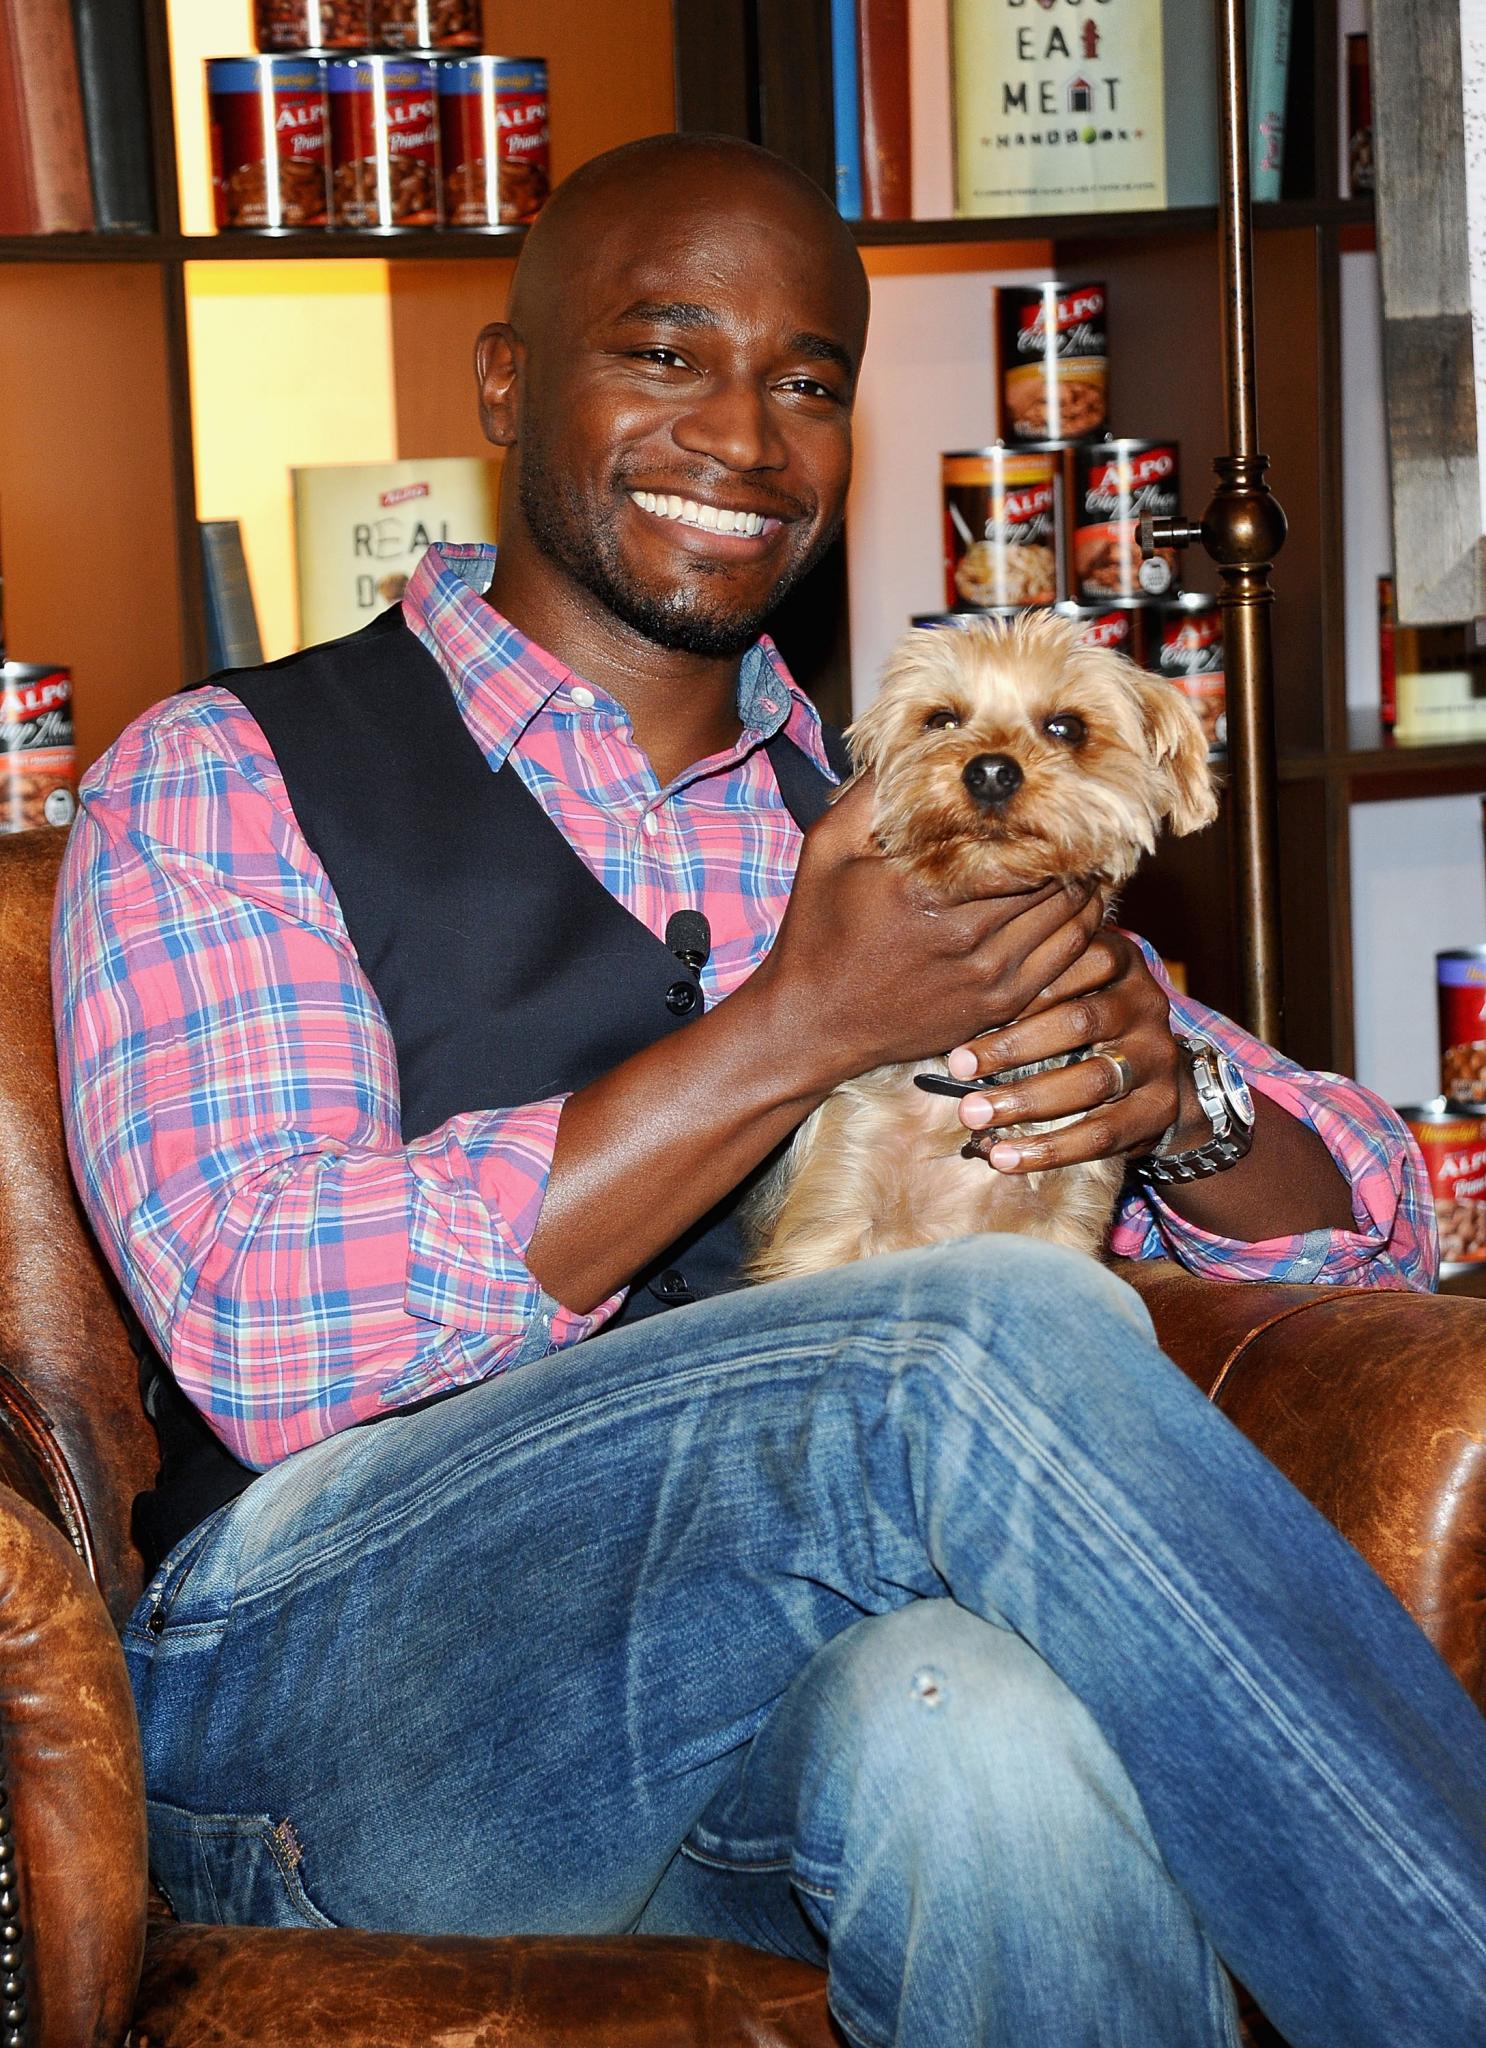 30 Celebs And Their Adorable Furry Friends